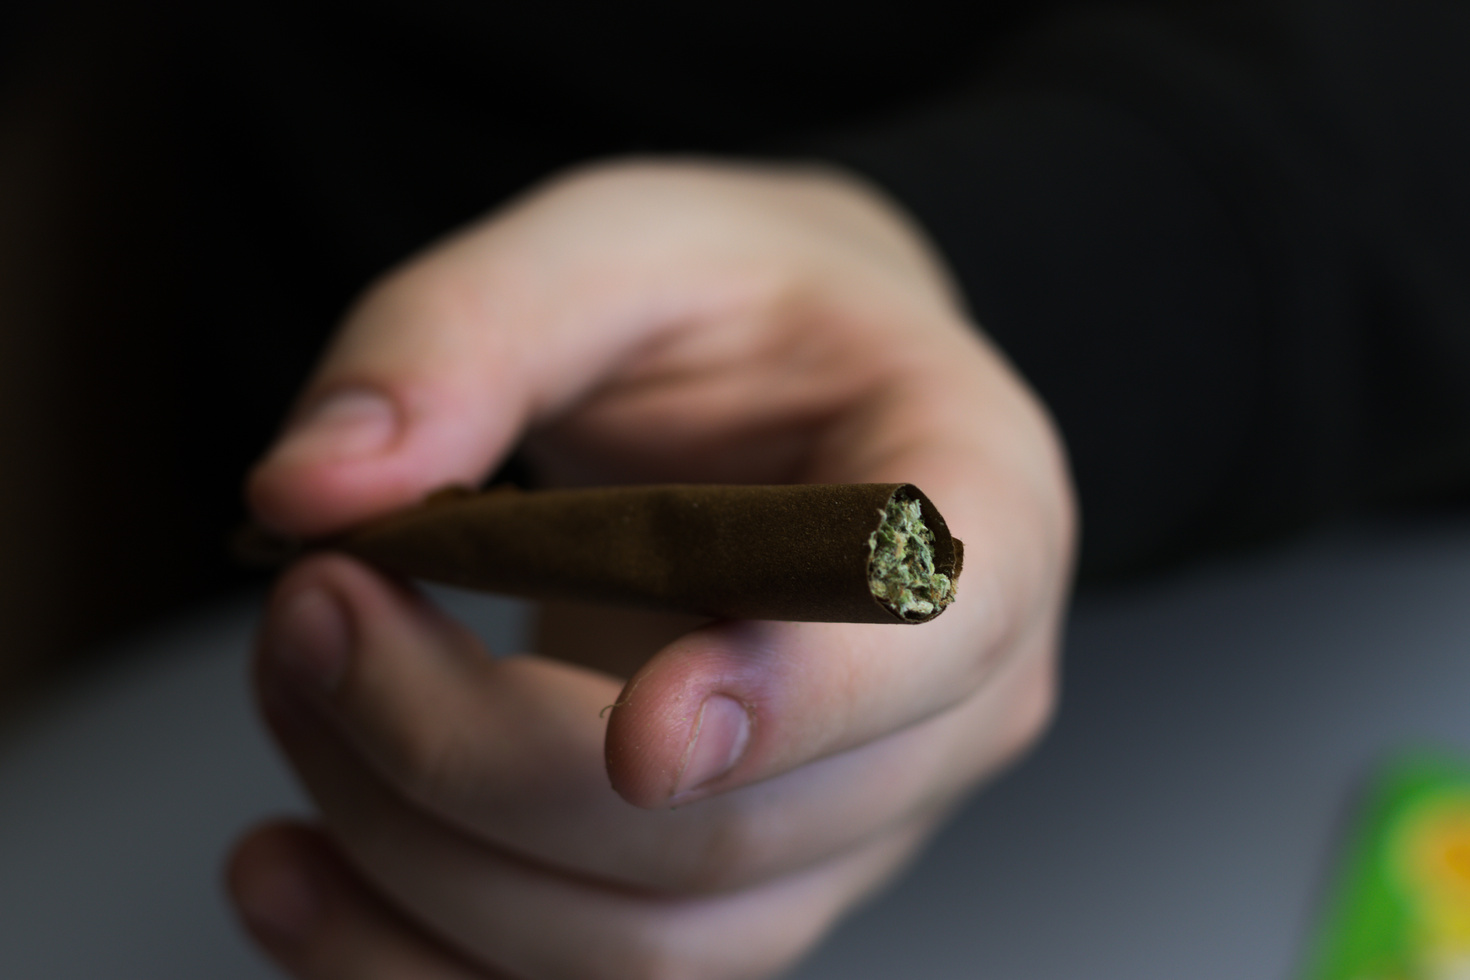 Cannabis blunt or joint close-up. Marijuana rolled in paper